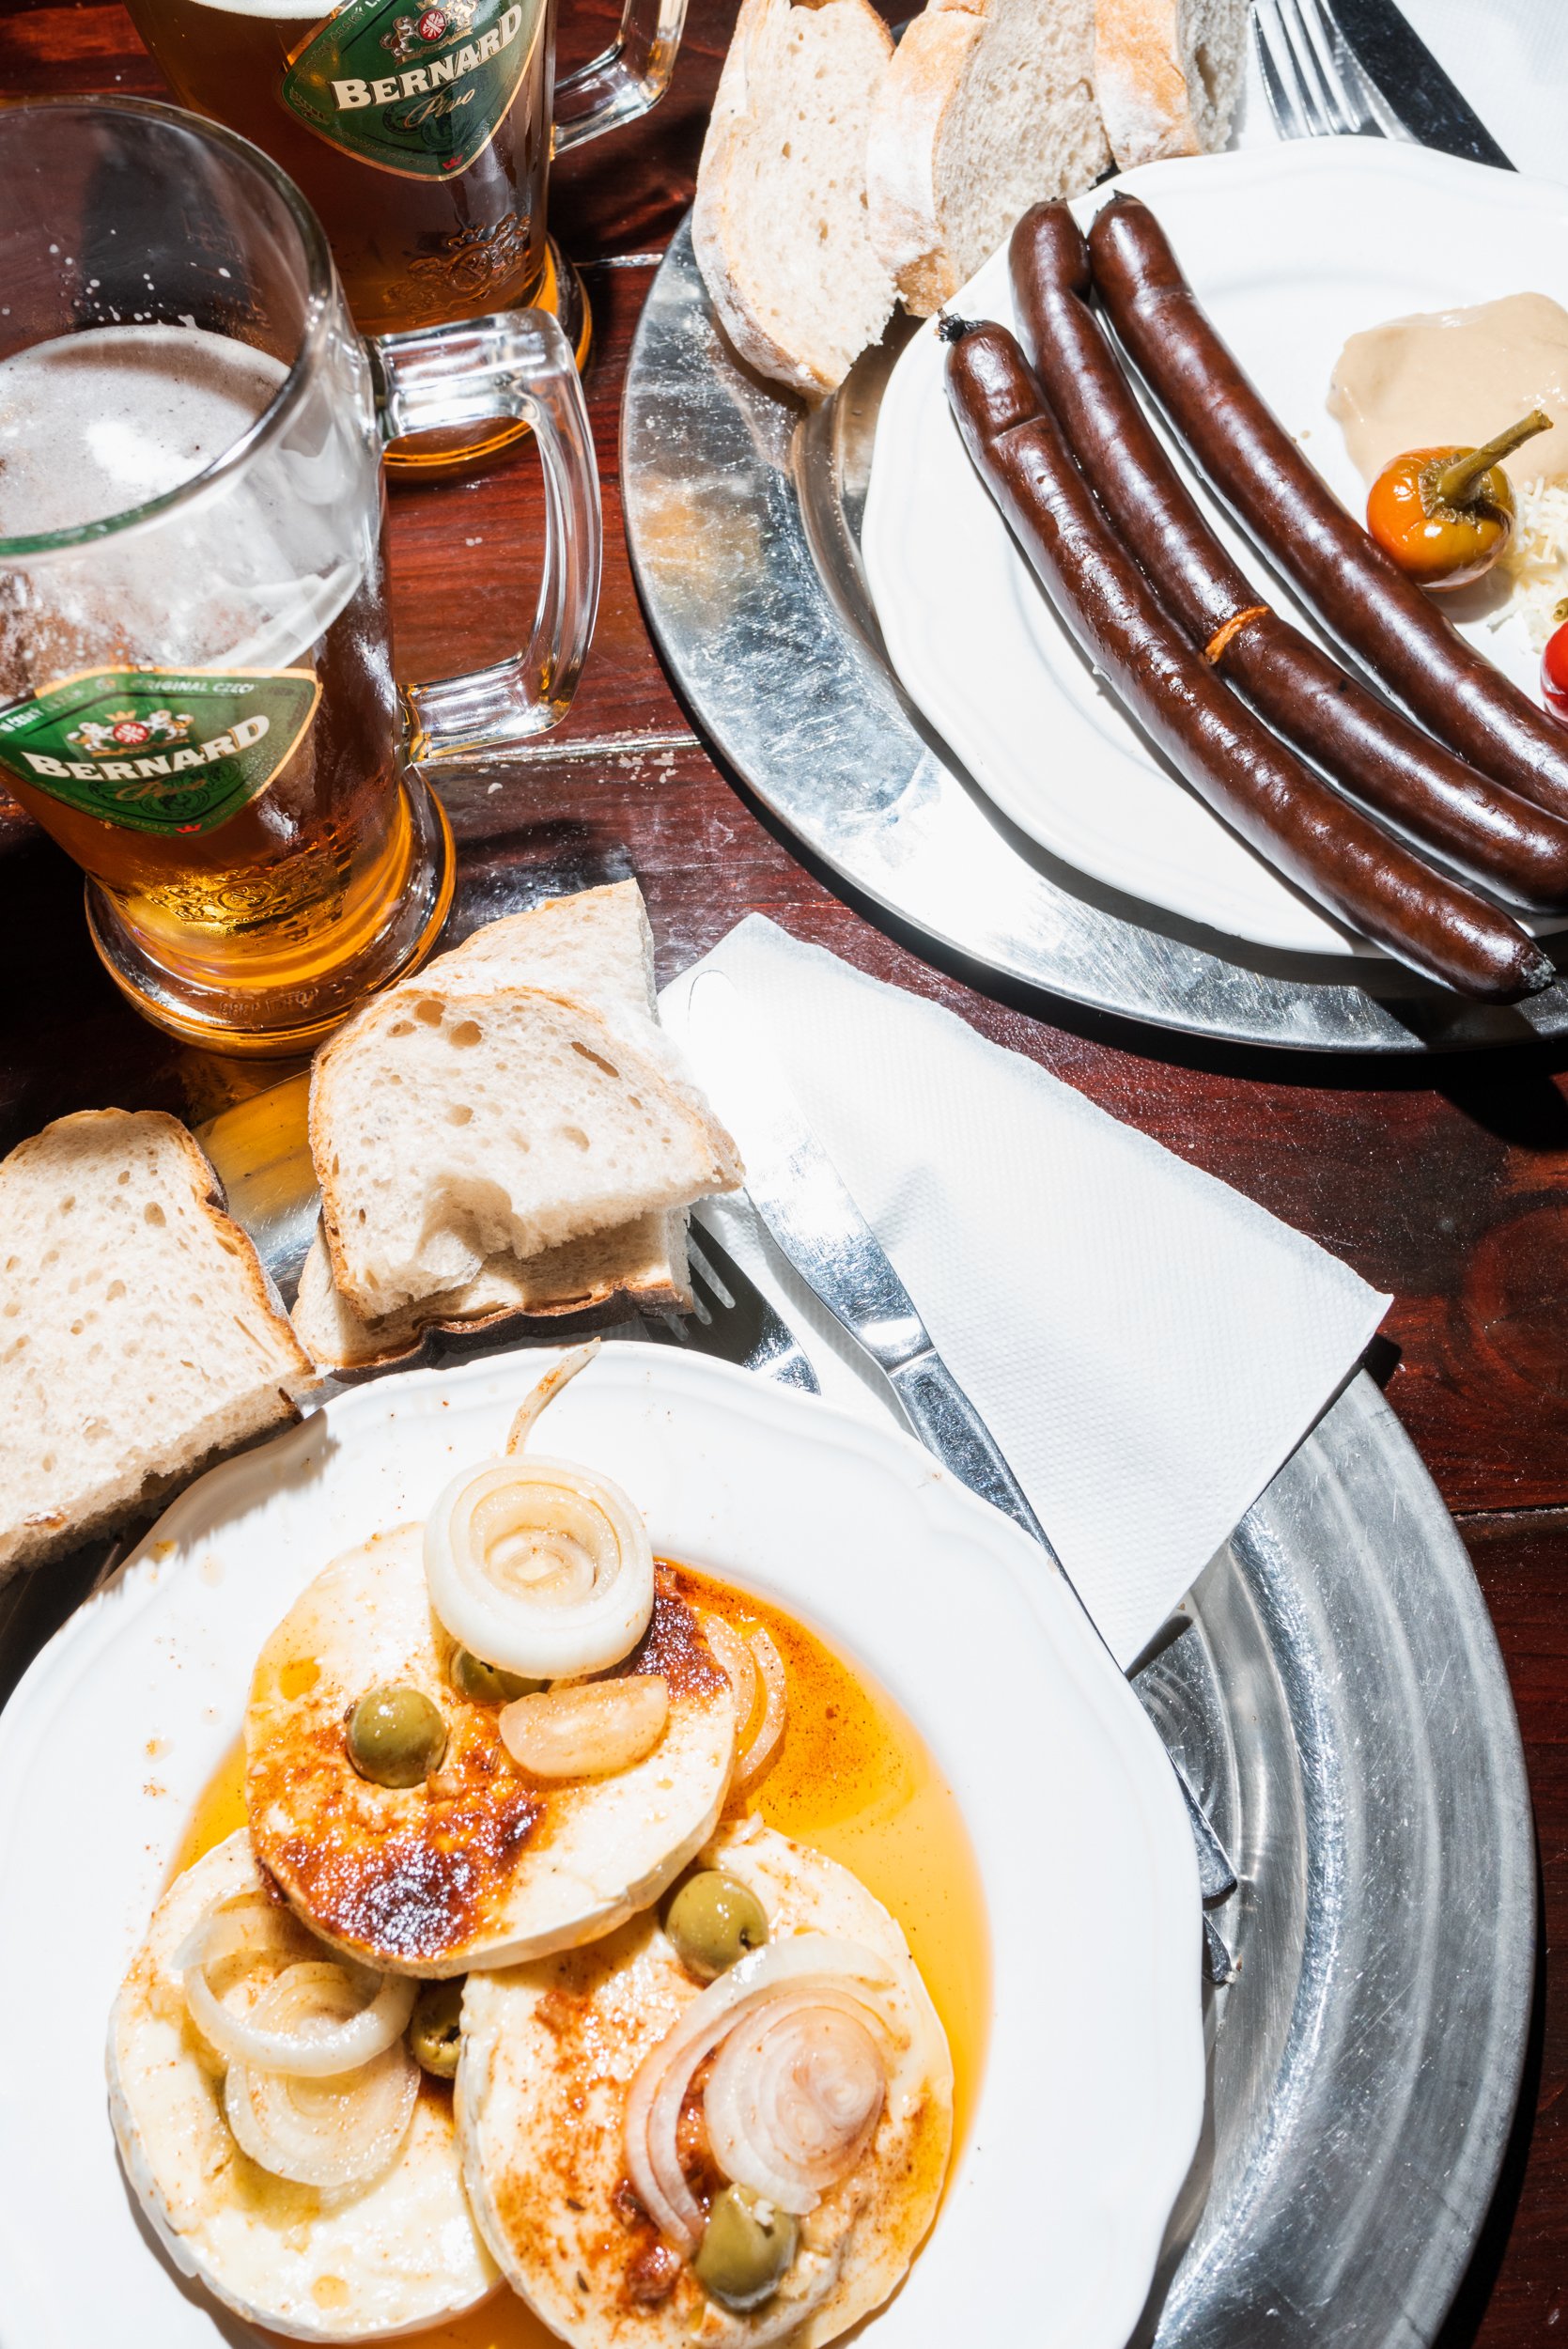 Traditional Slovak food on plates with beer